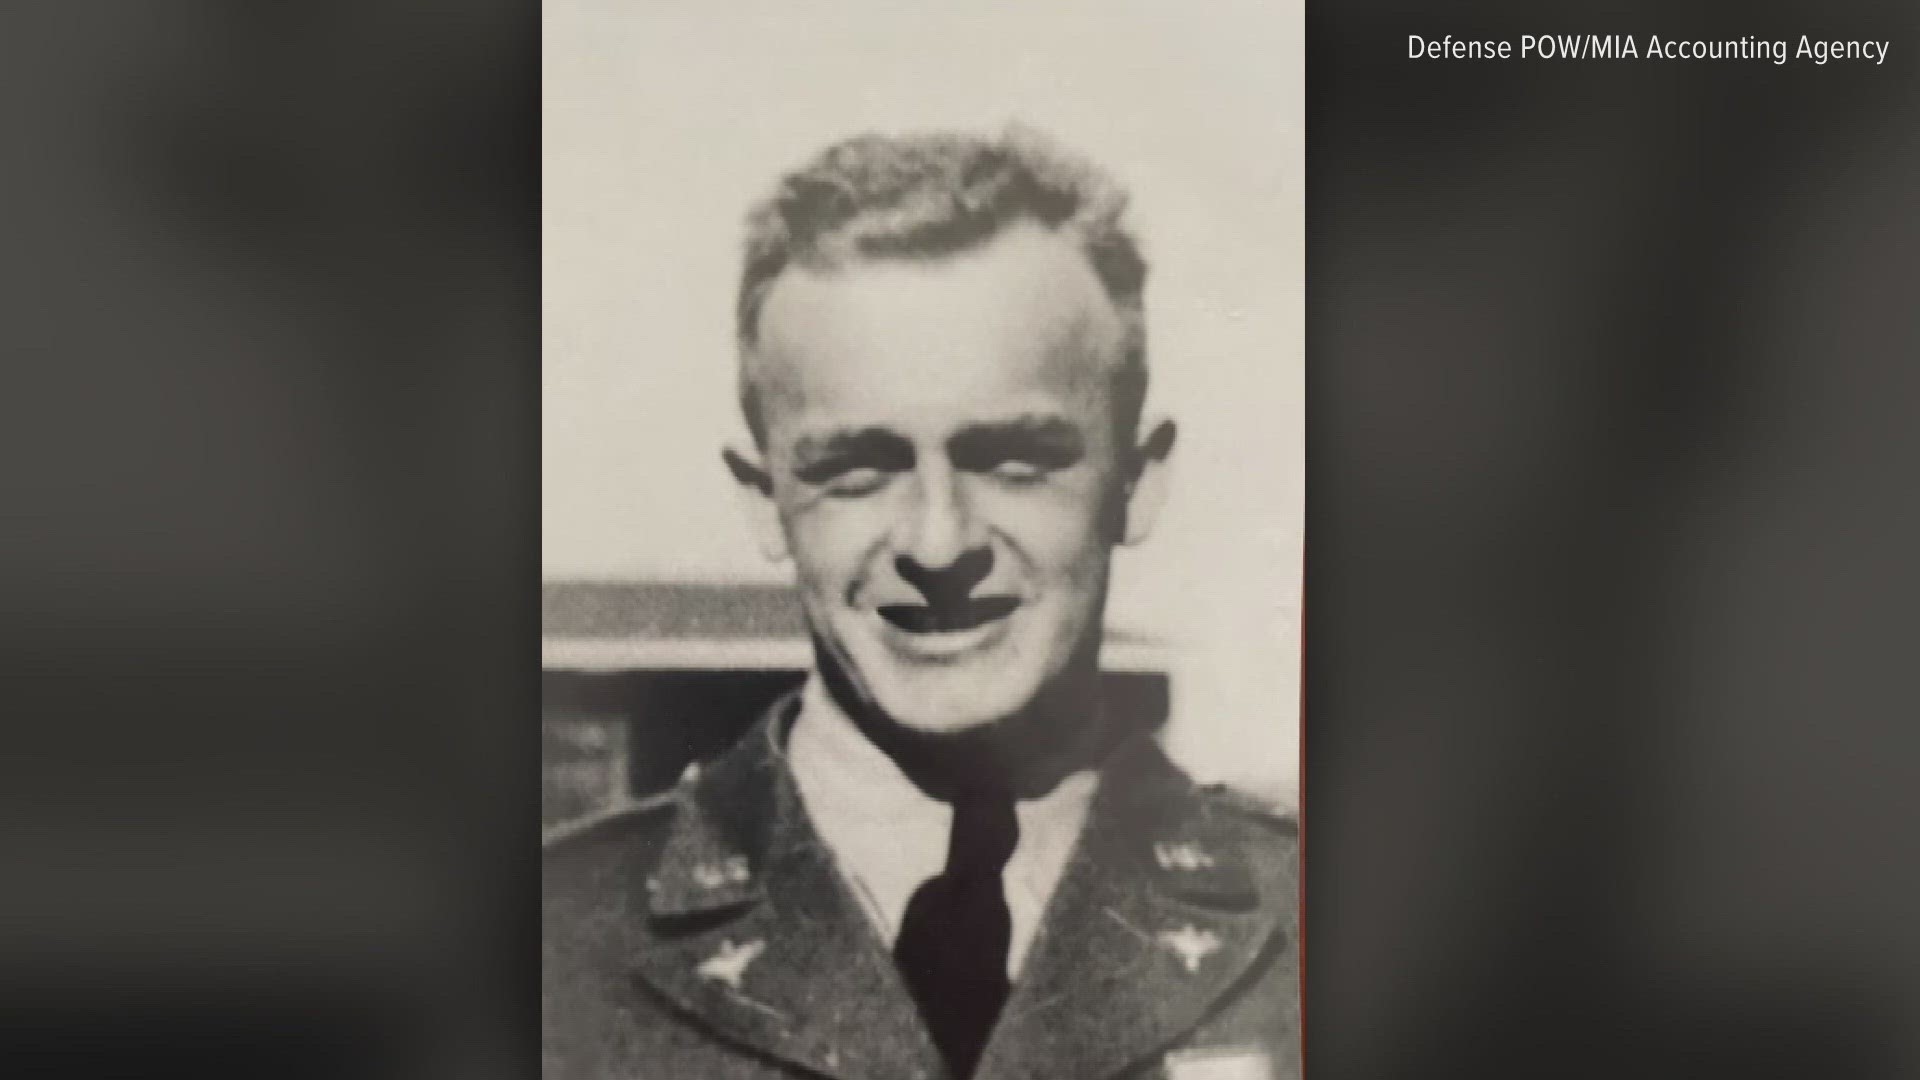 George Winger’s remains were identified earlier this year, more than 70 years after his plane went down during a bombing mission in World War II.